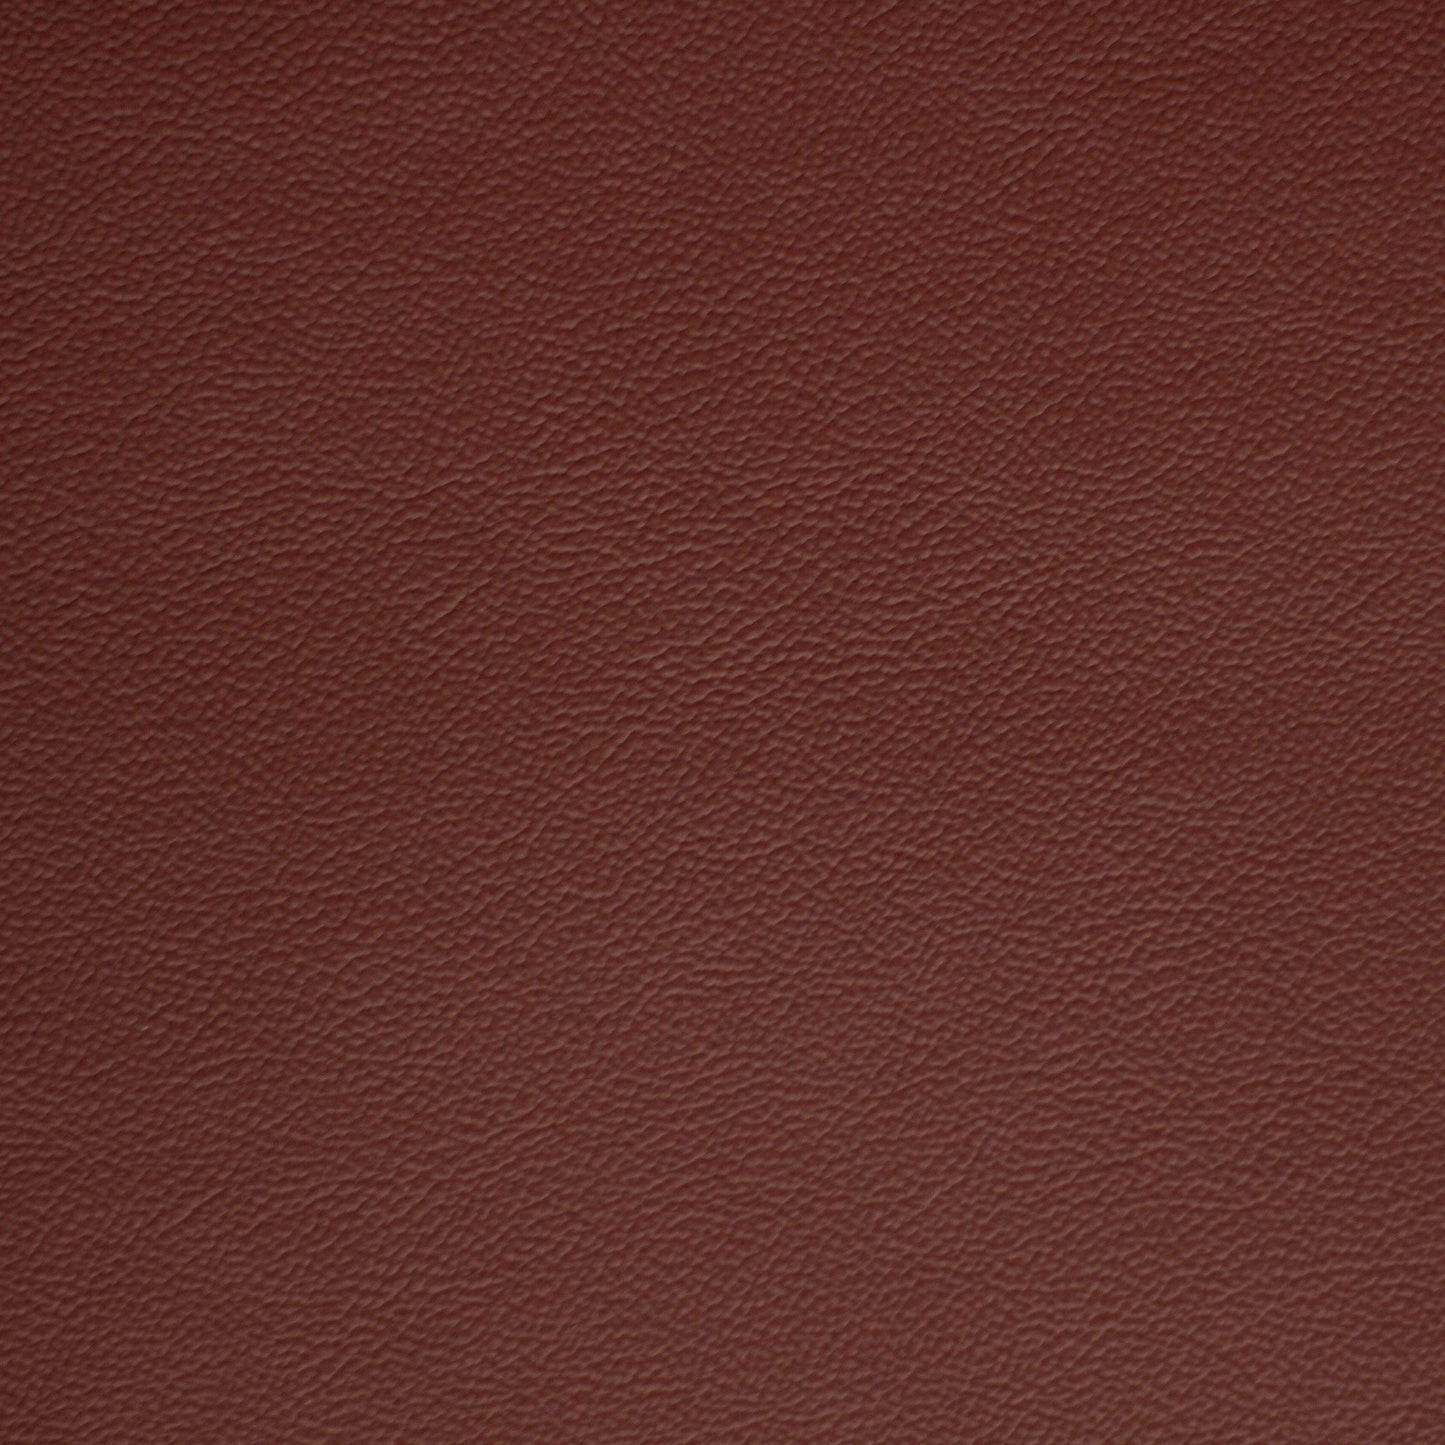 Empire, Romeo, Iconic® Antimicrobial & Cleanable, Hospitality Leather Hide